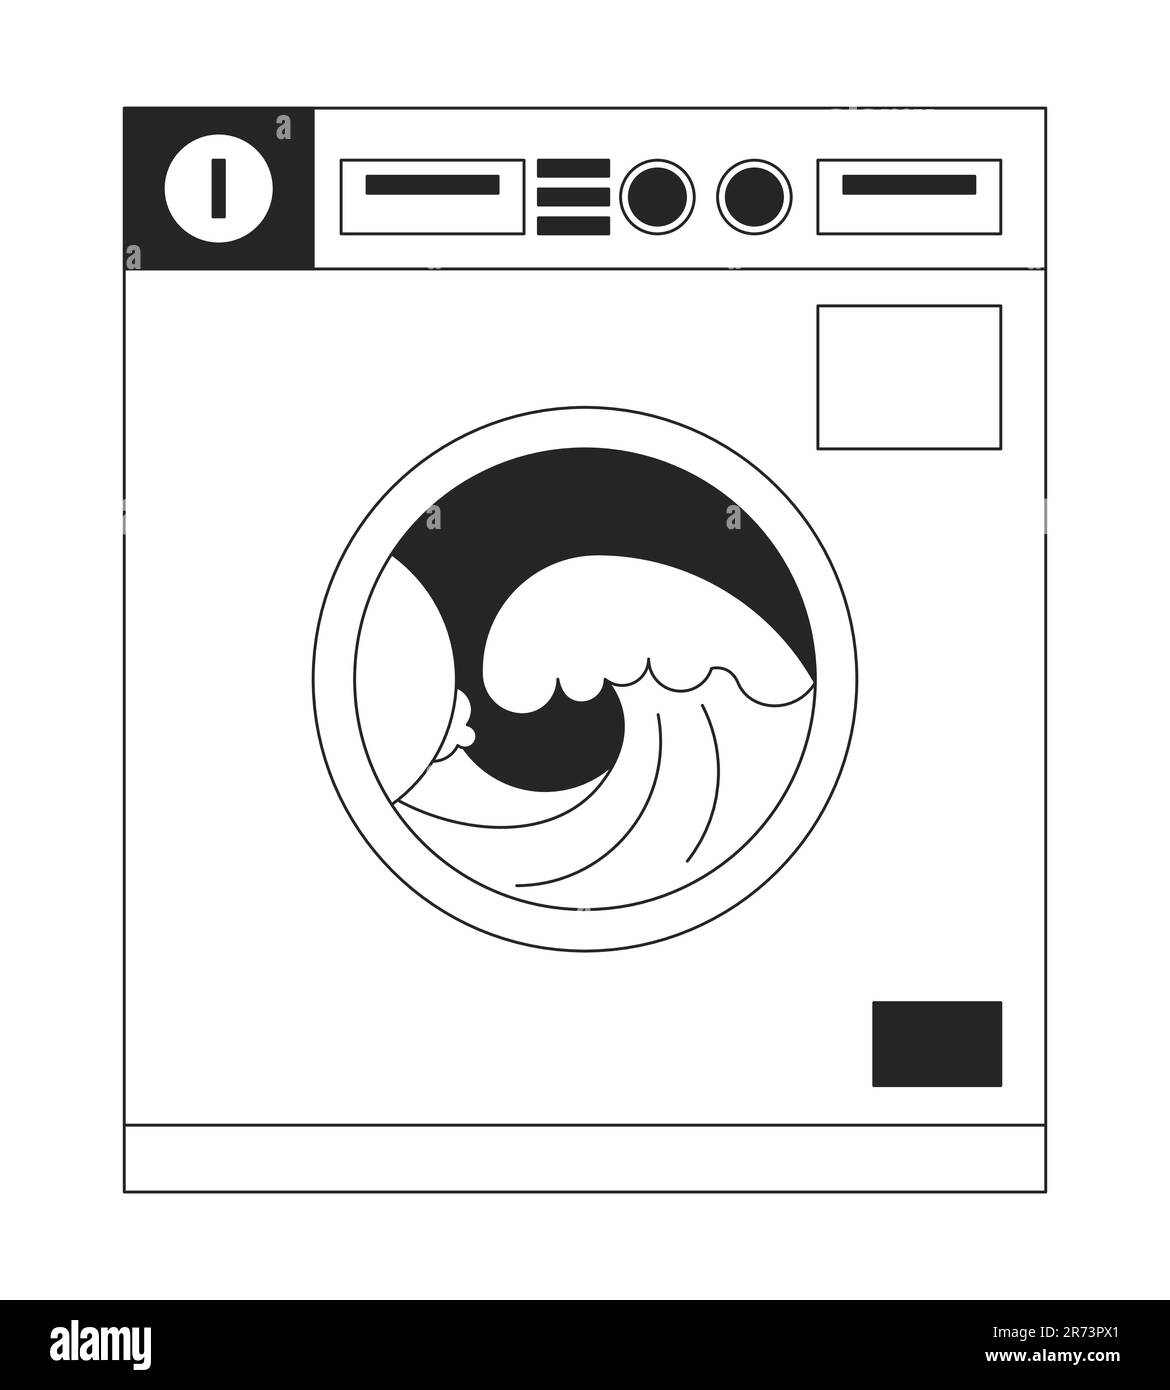 Coin operated washing machine with ocean waves line art vector cartoon icon Stock Vector